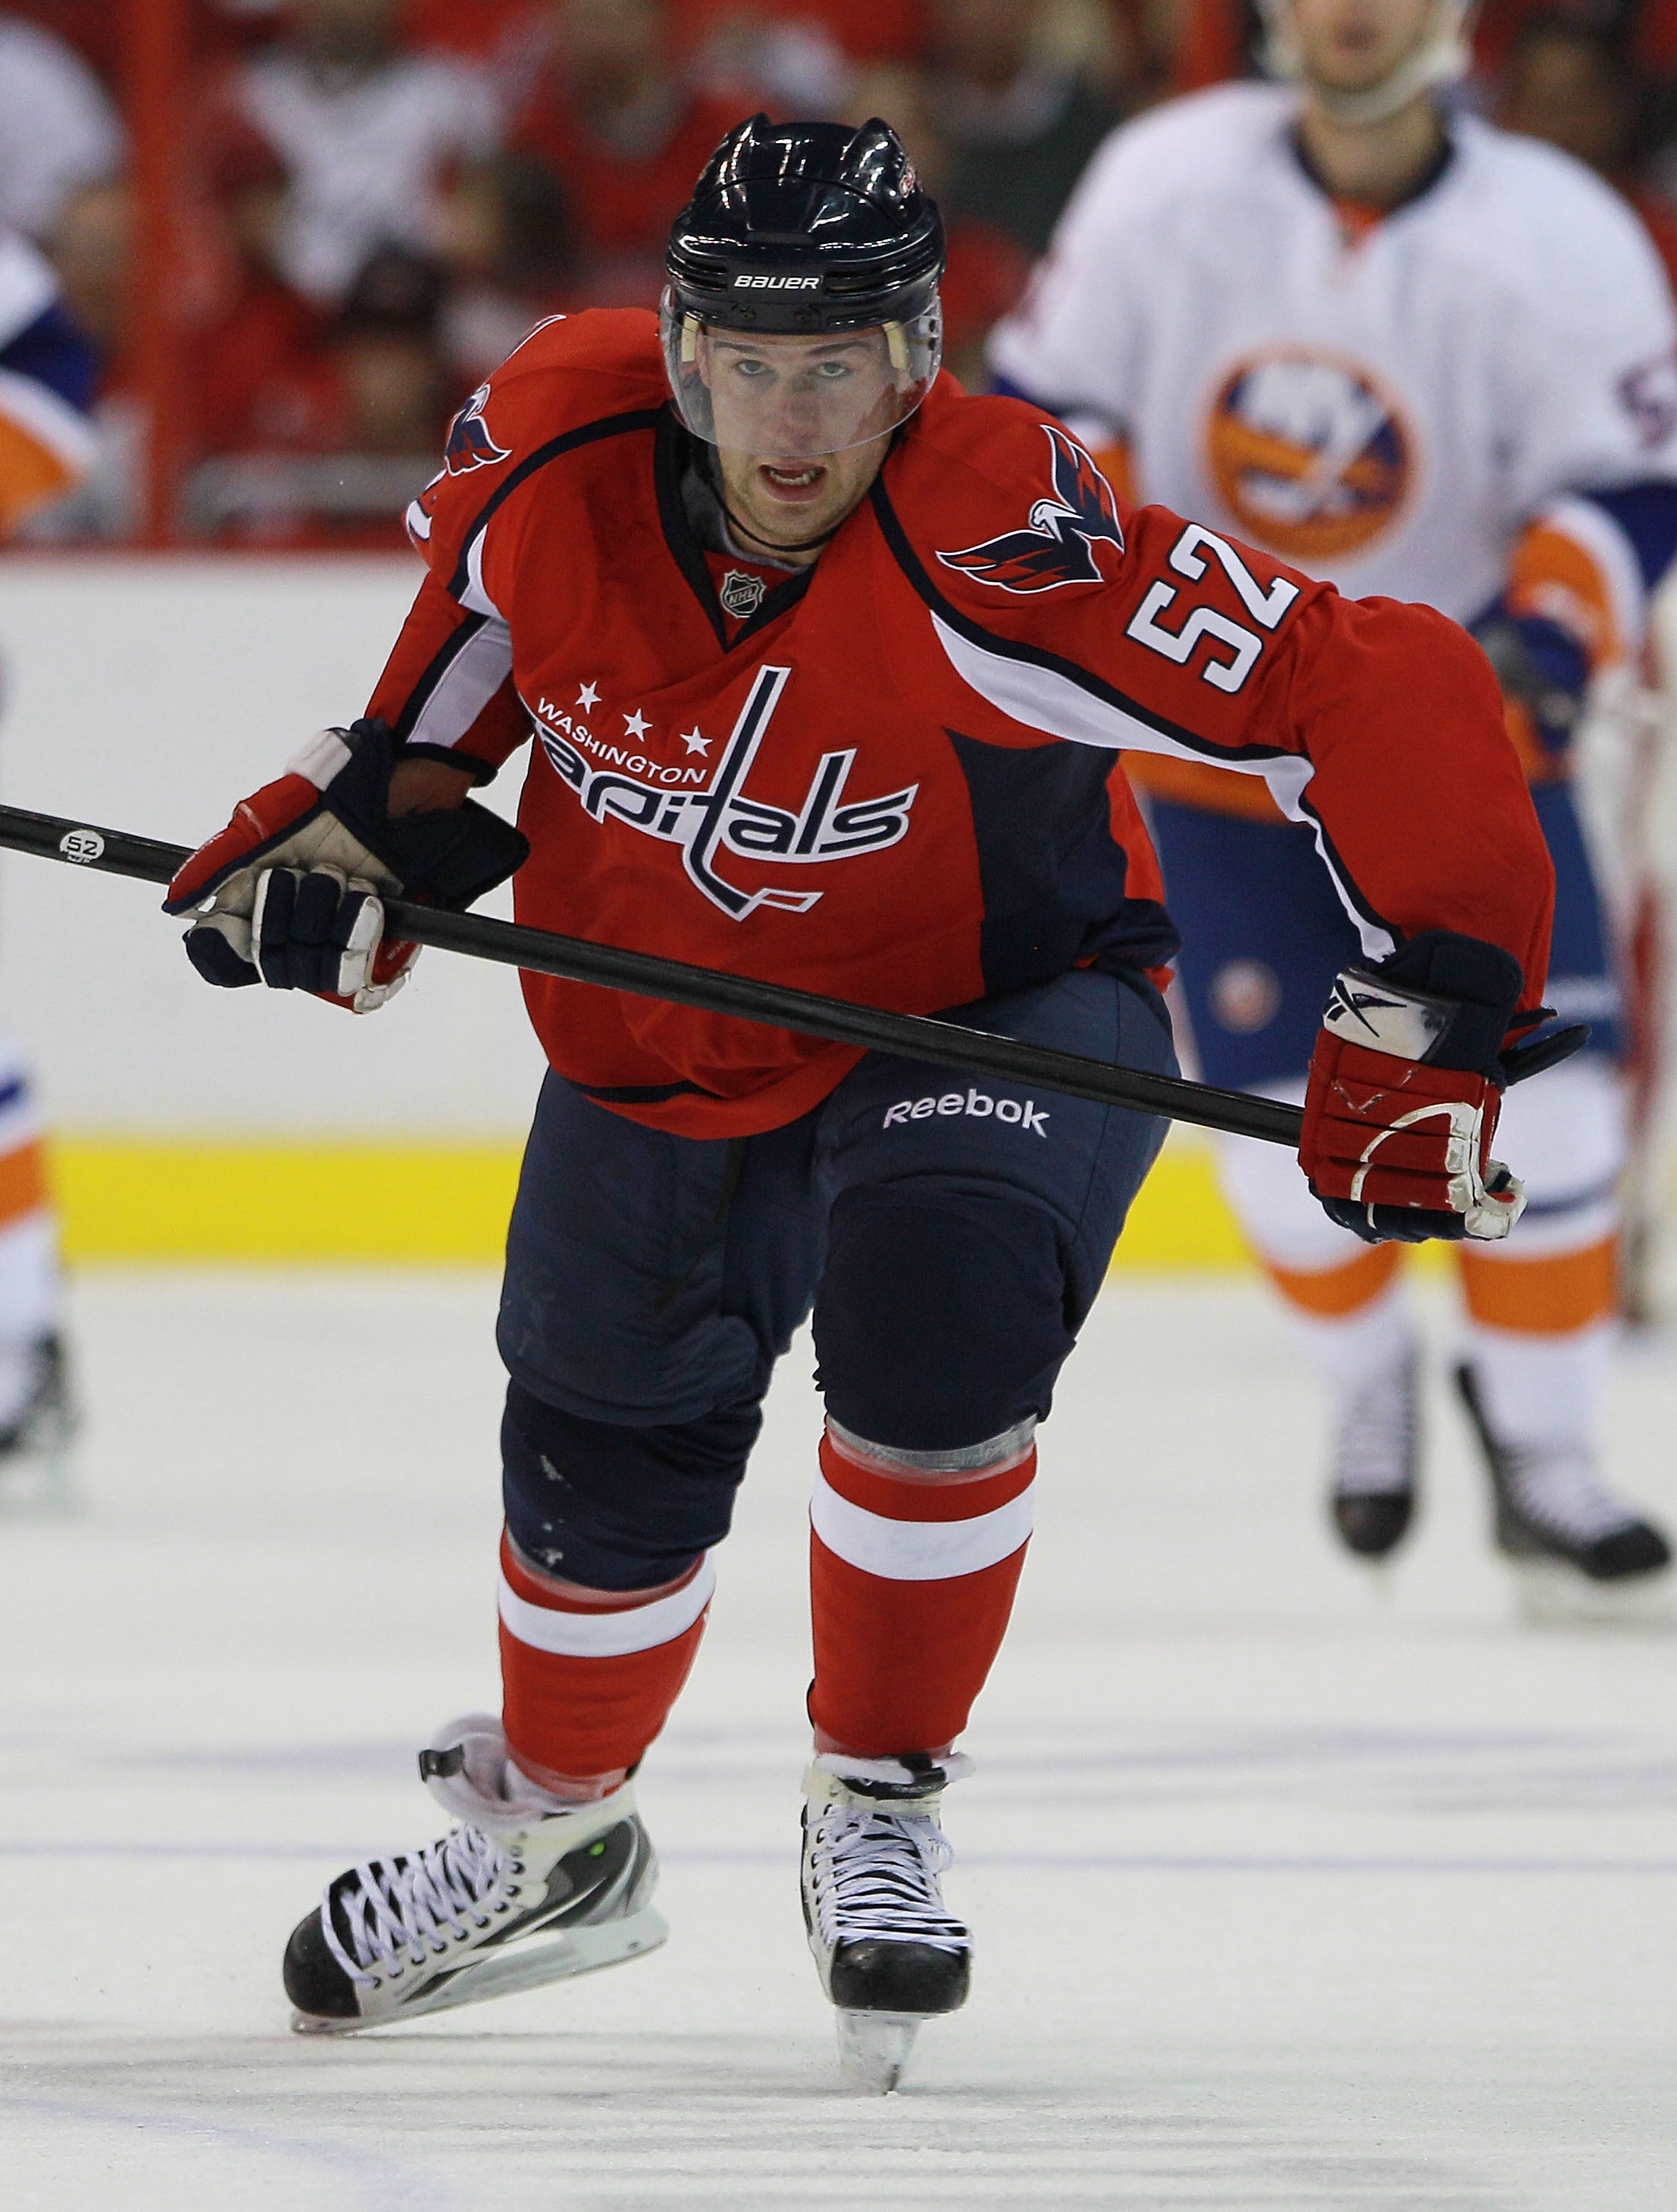 WASHINGTON - OCTOBER 13:  Mike Green #52 of the Washington Capitals skates against the New York Islanders at the Verizon Center on October 13, 2010 in Washington, DC.  (Photo by Bruce Bennett/Getty Images)